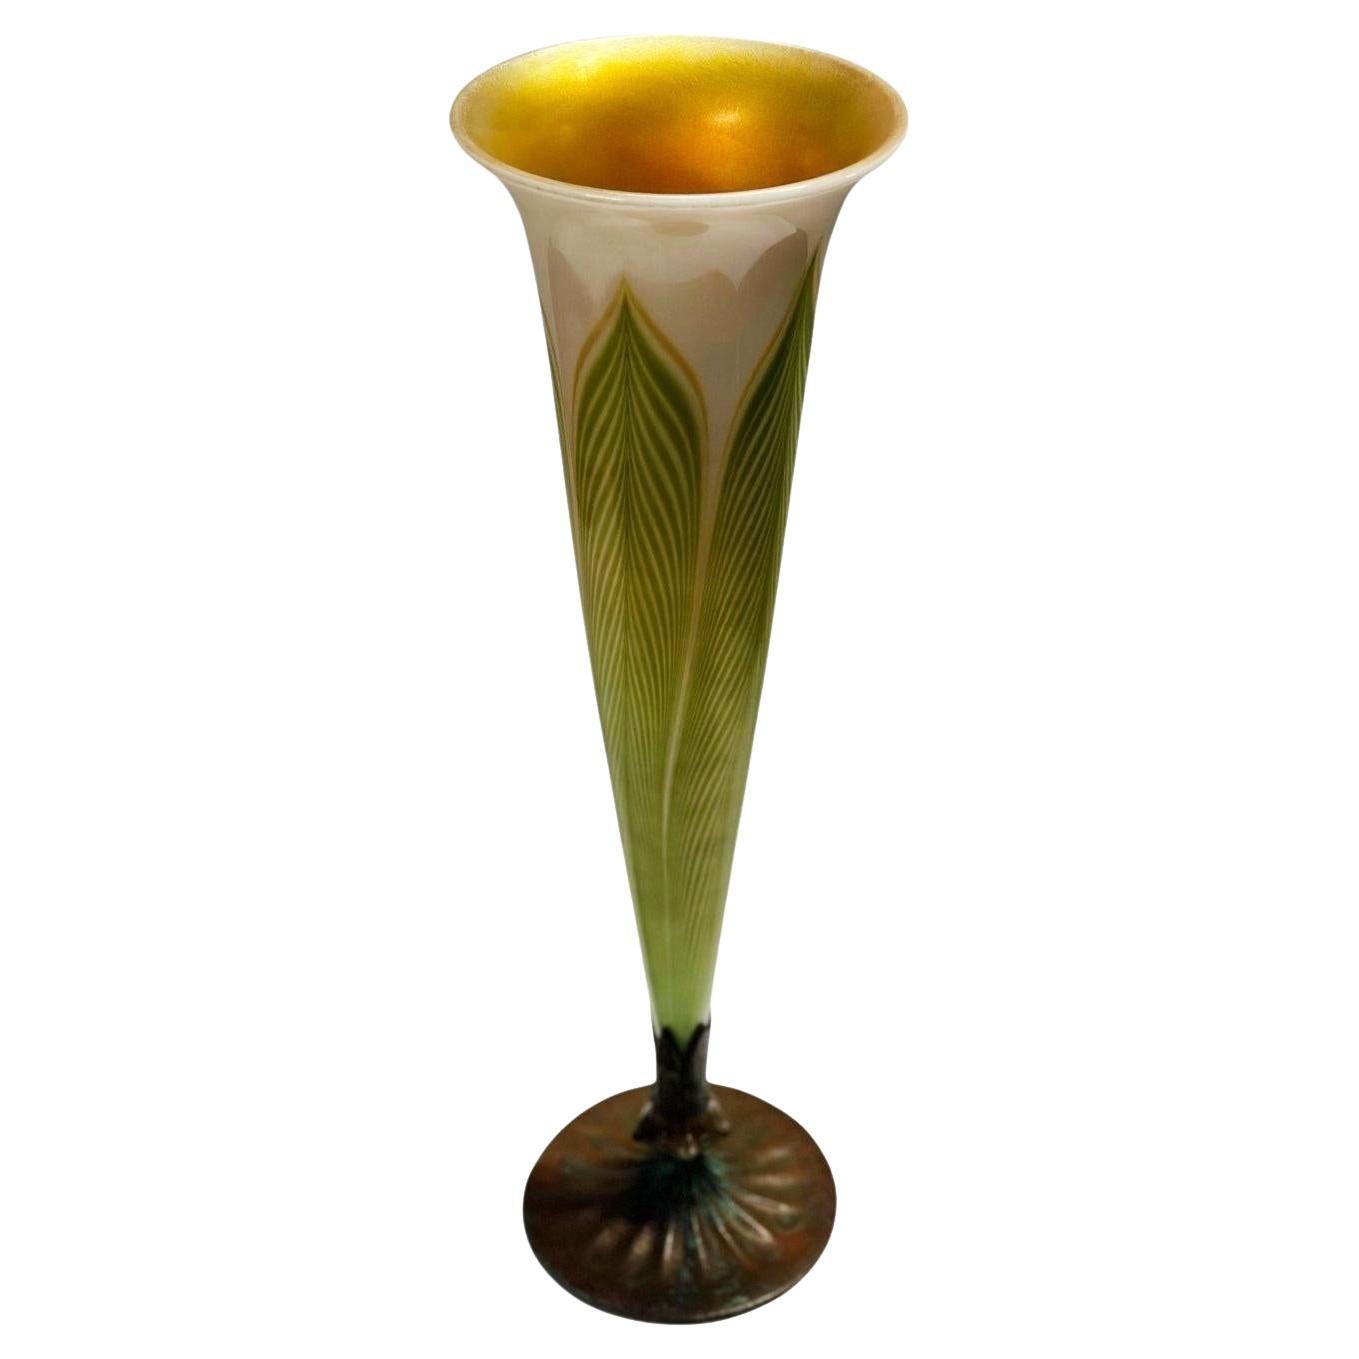 What made Louis Comfort Tiffany's favrile glass special?